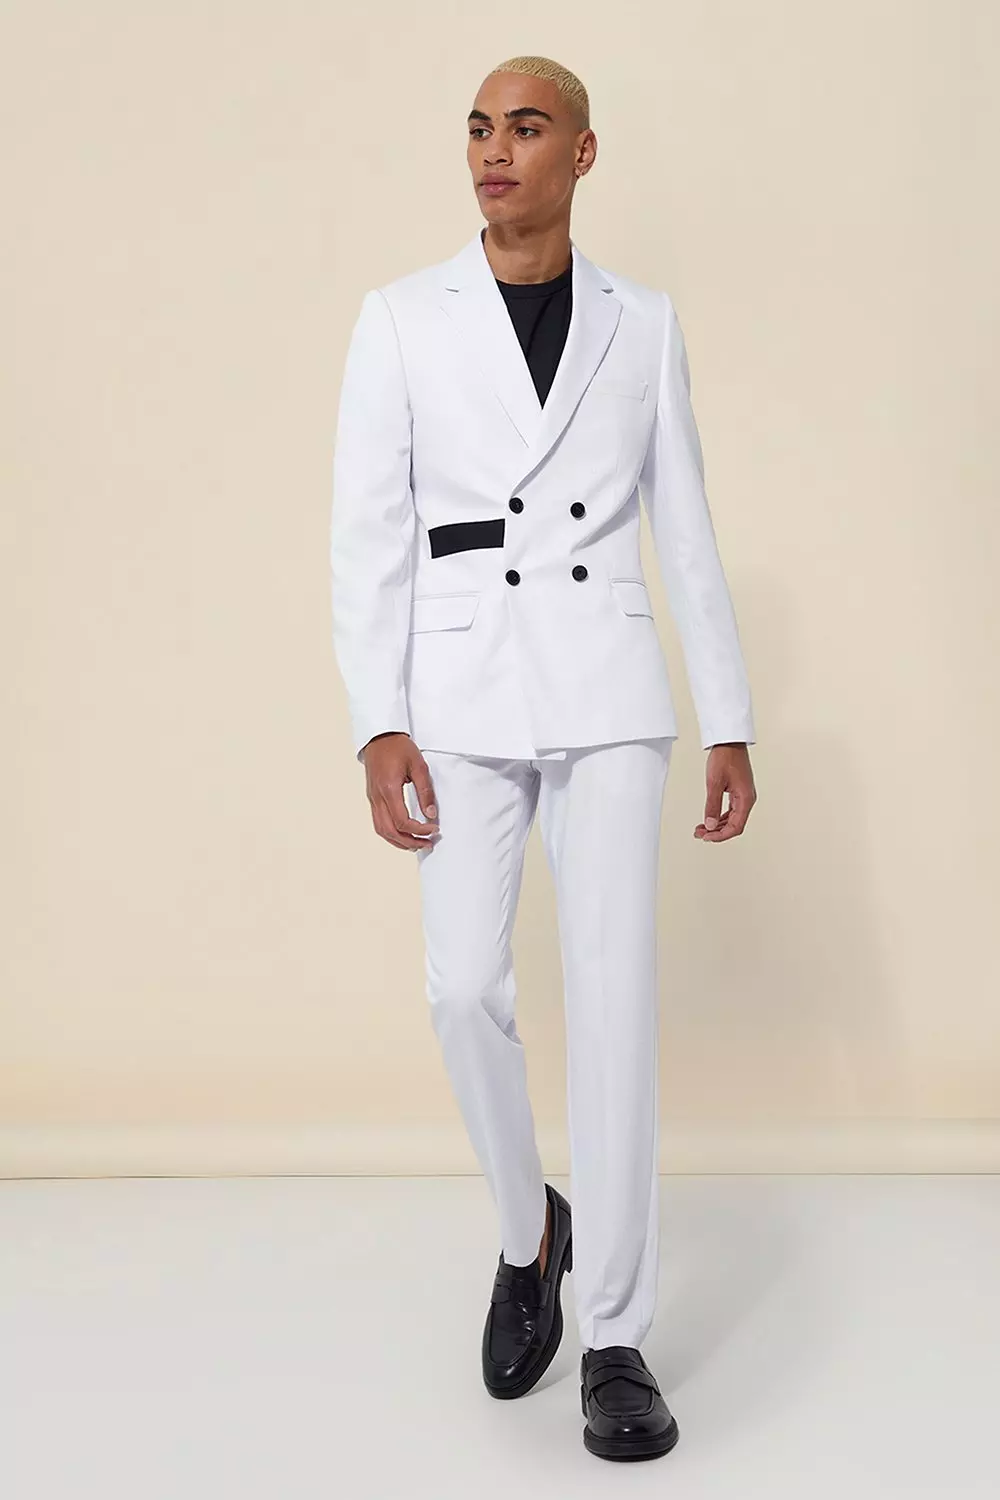 S/S 2001 Double-Breasted White Suit Set